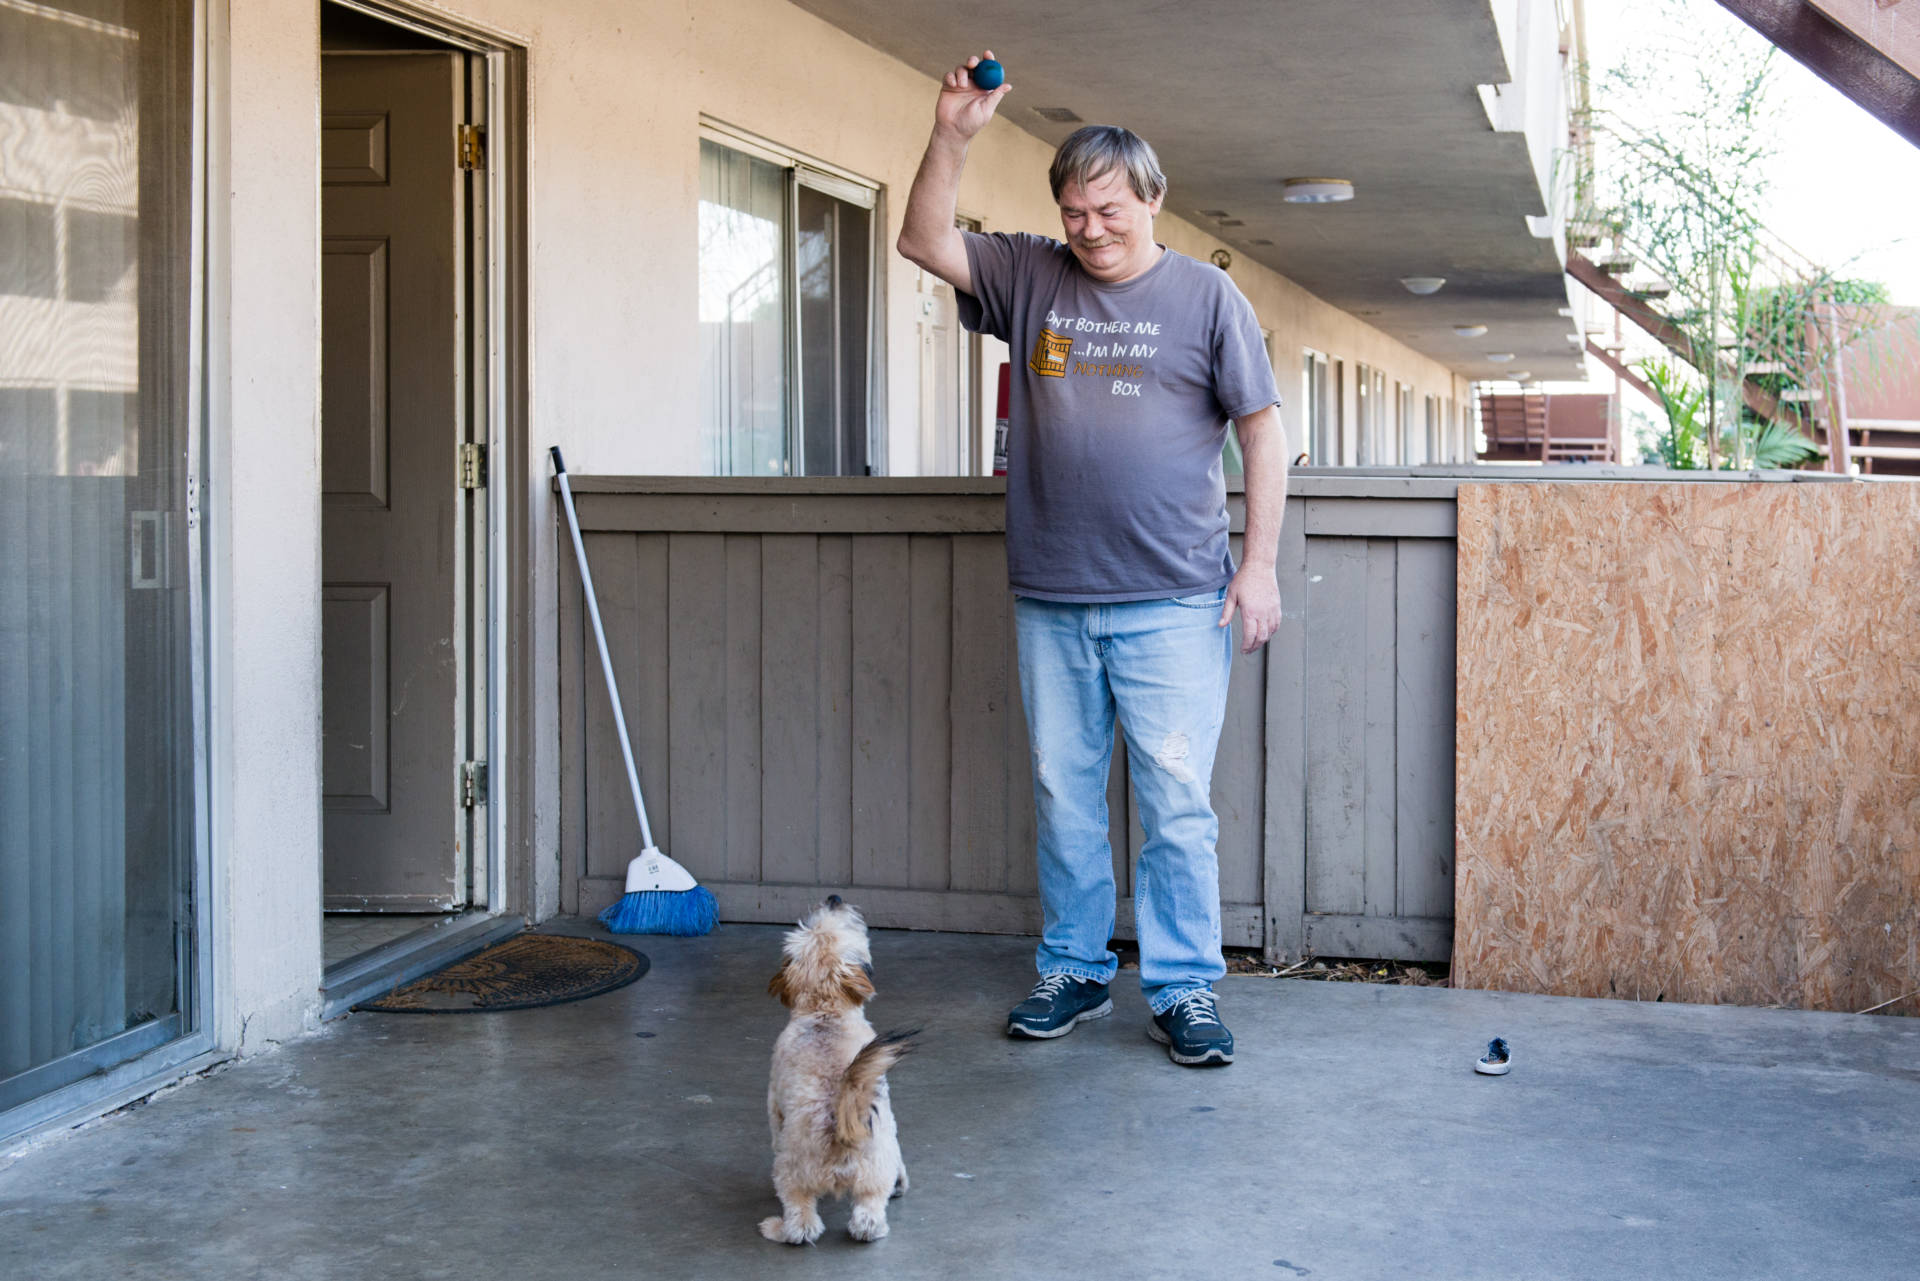 Donald Meade plays with his puppy, Scrappy, at his new apartment in Fullerton, Calif.